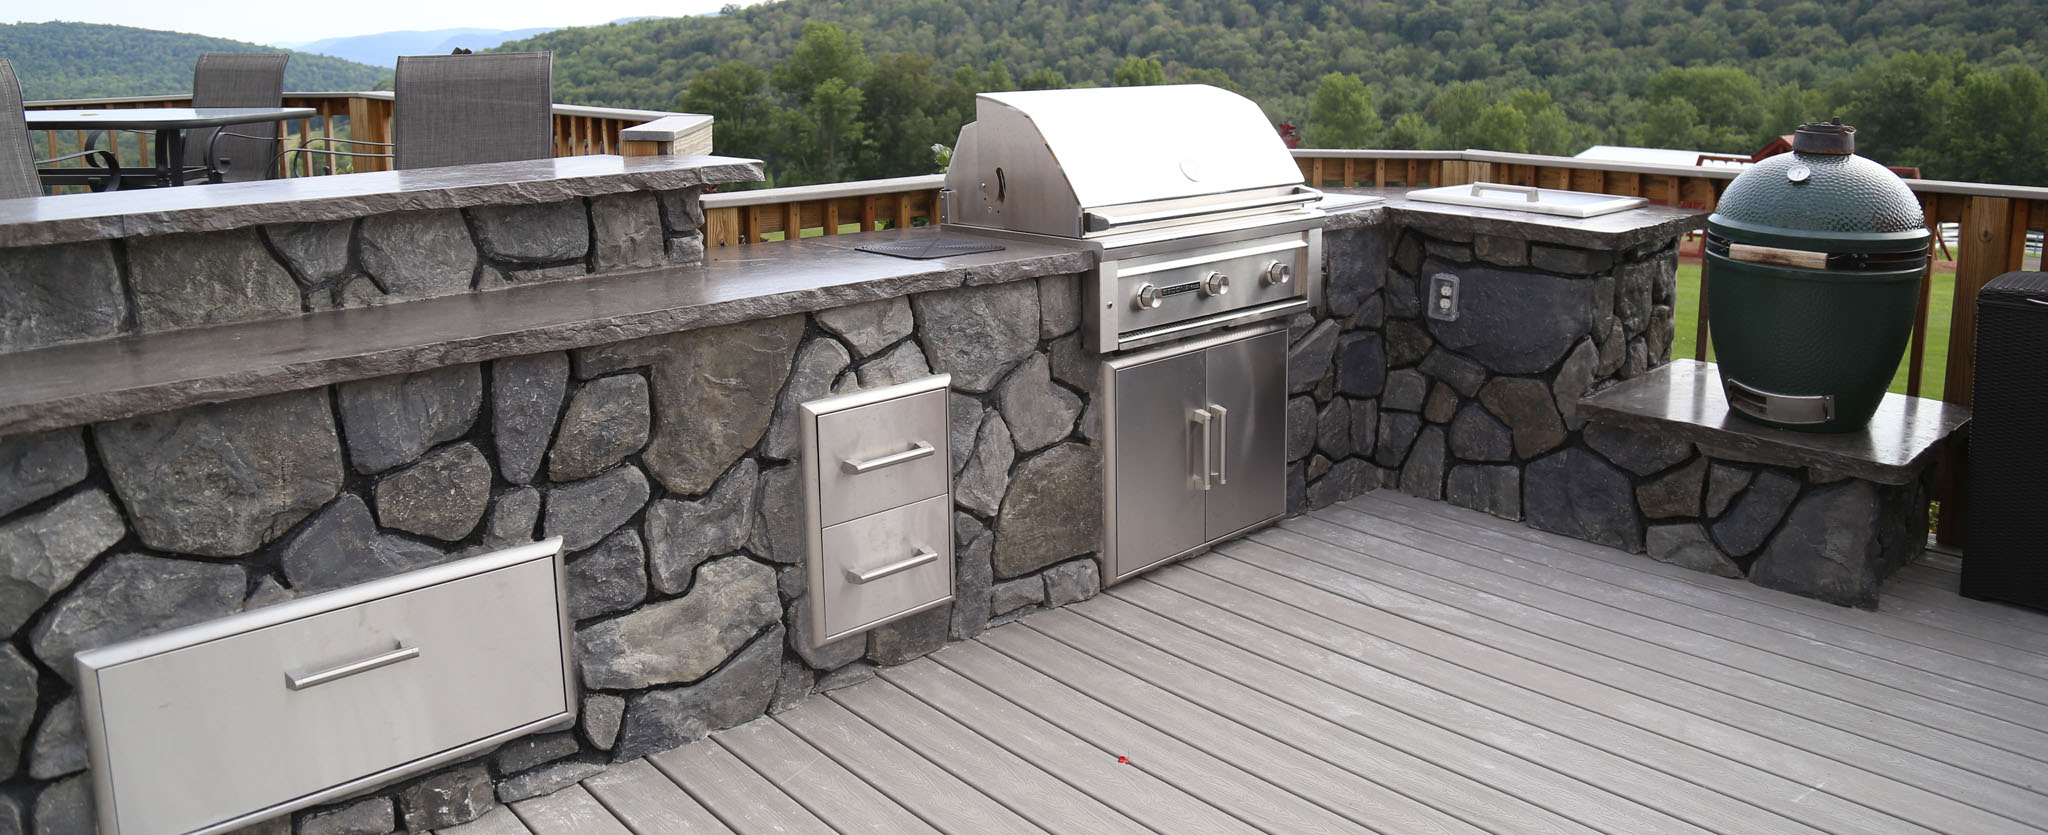 Deck Top Outdoor Kitchens Can It Be